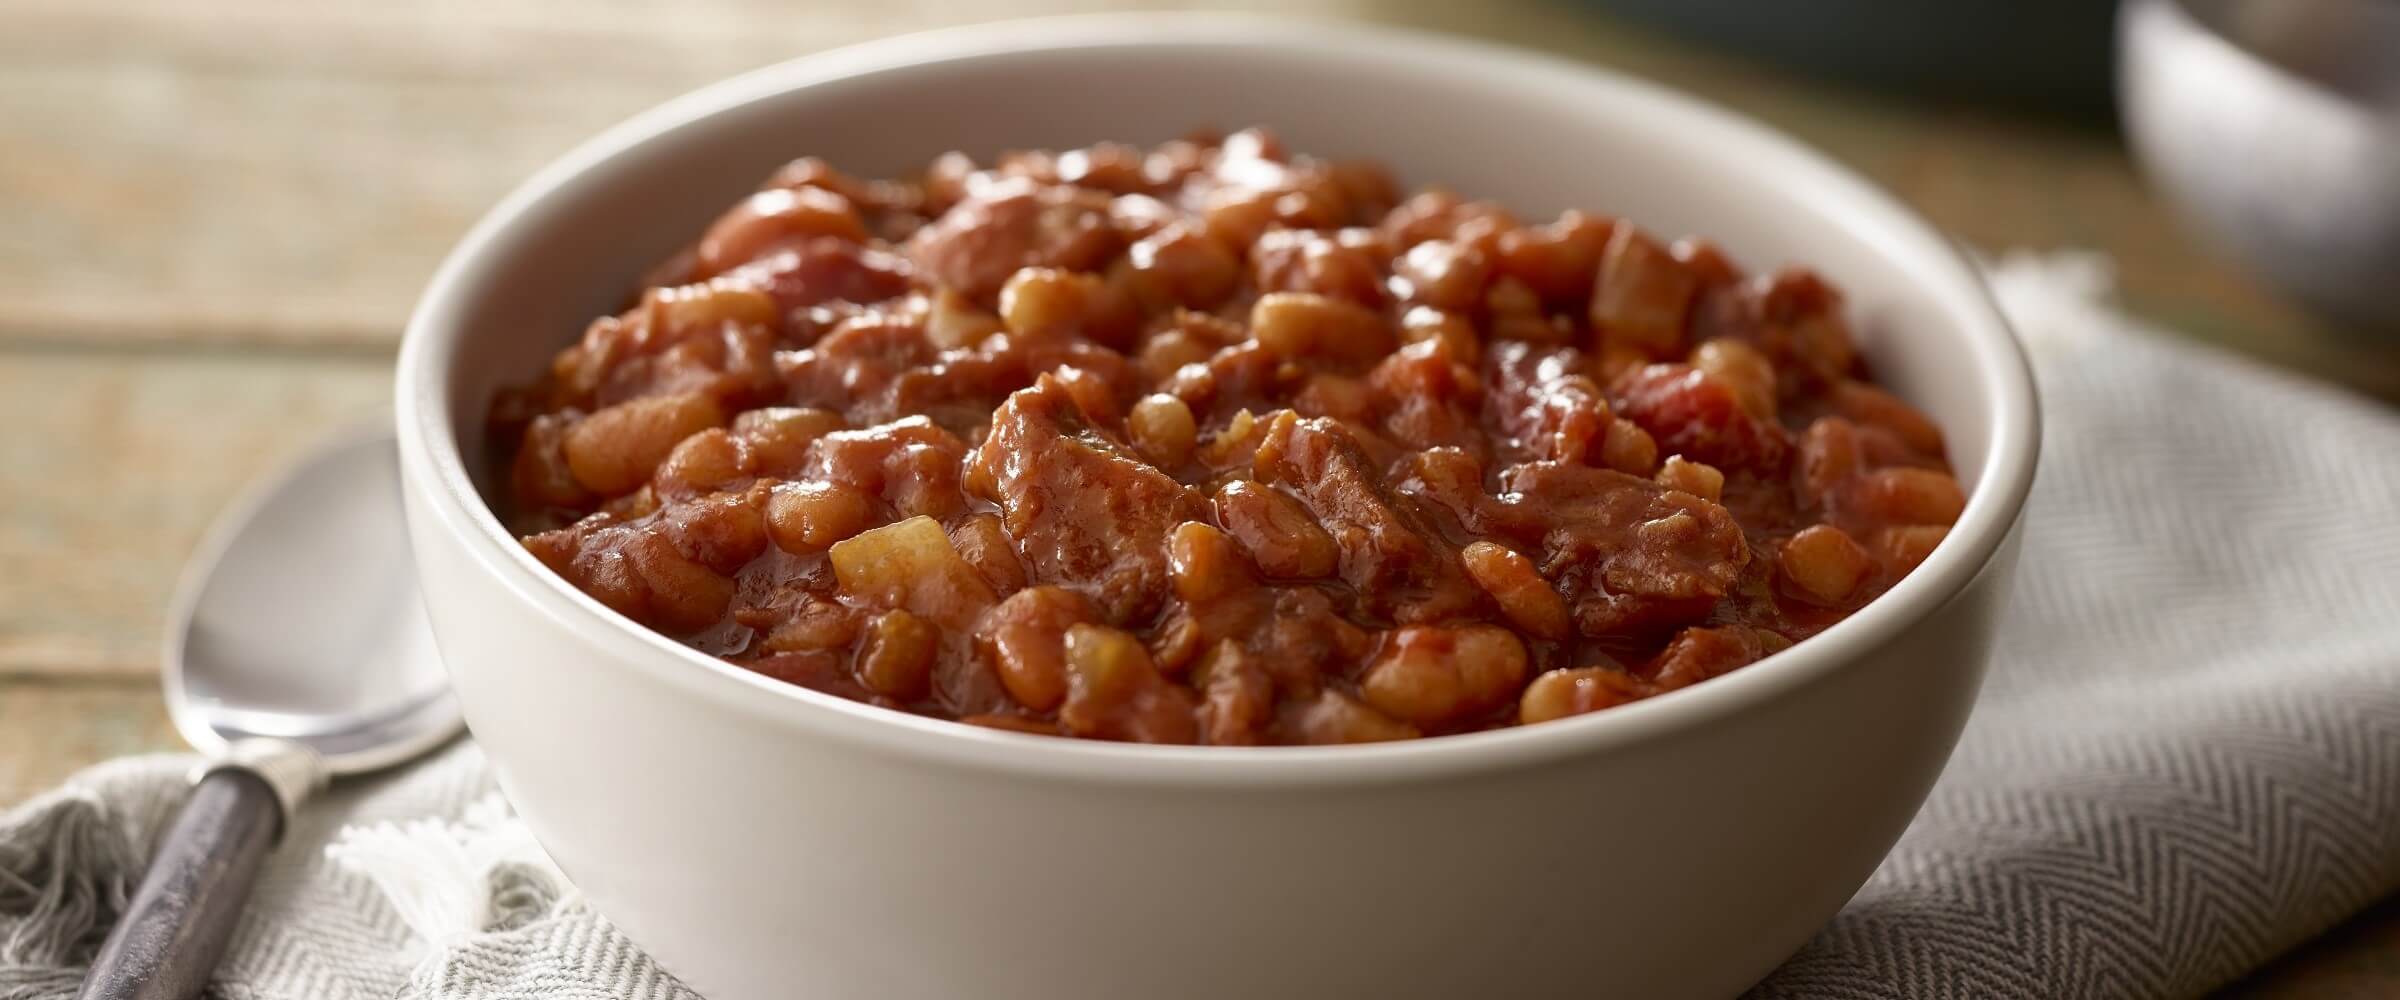 BBQ baked beans in bowl with spoon on cream napkin